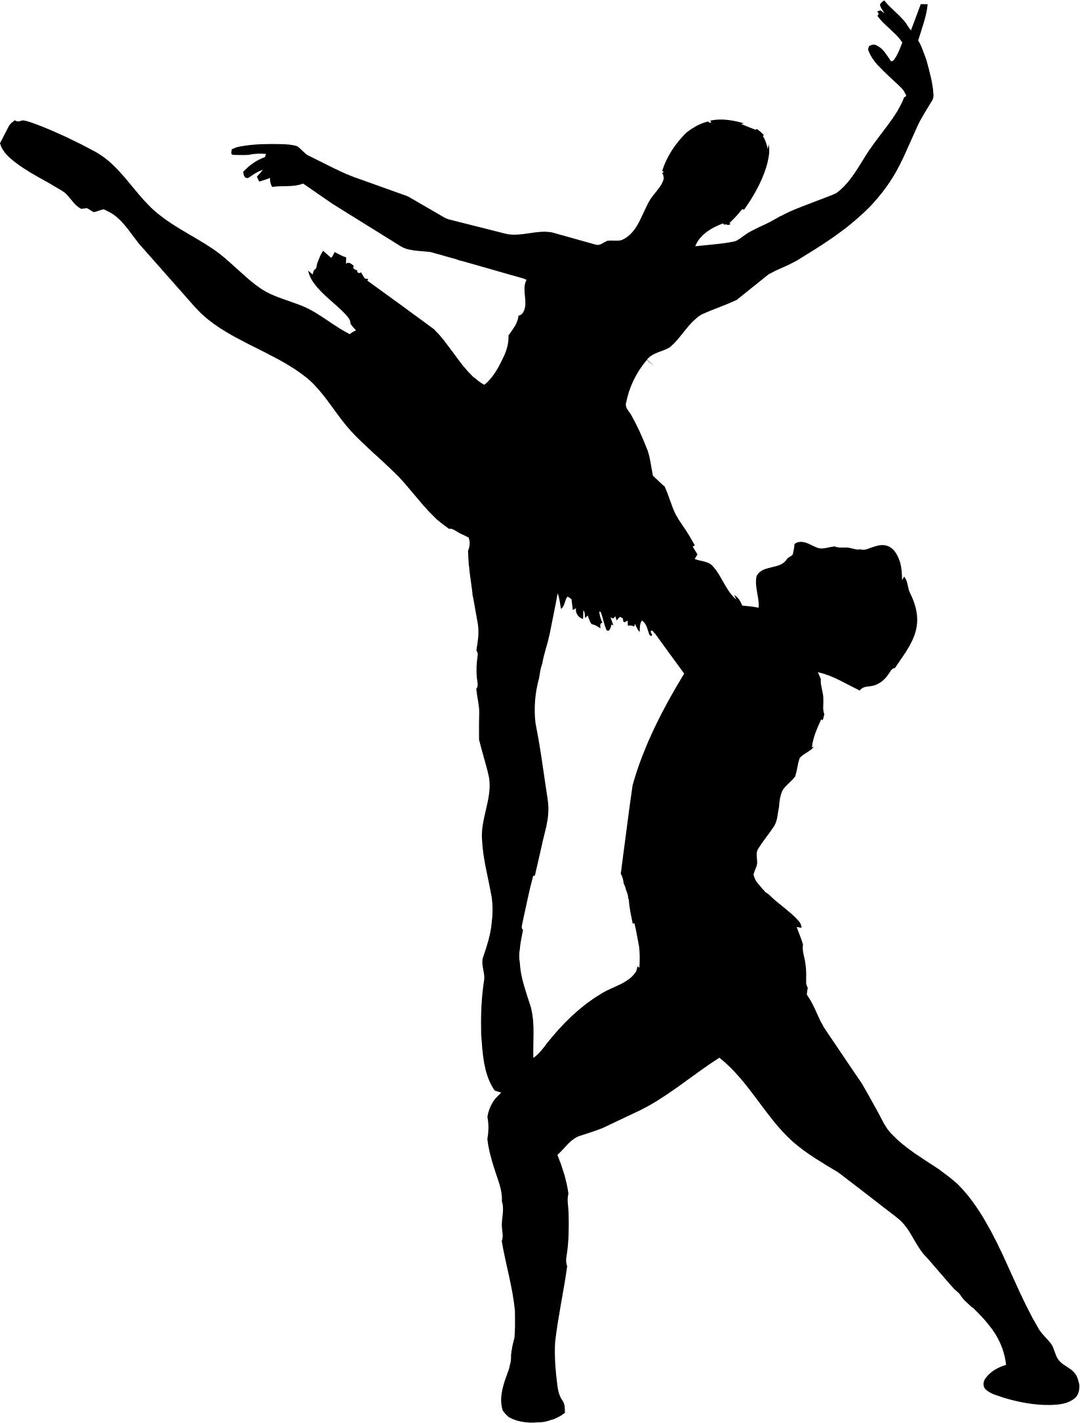 Woman And Man Ballet Silhouette png transparent